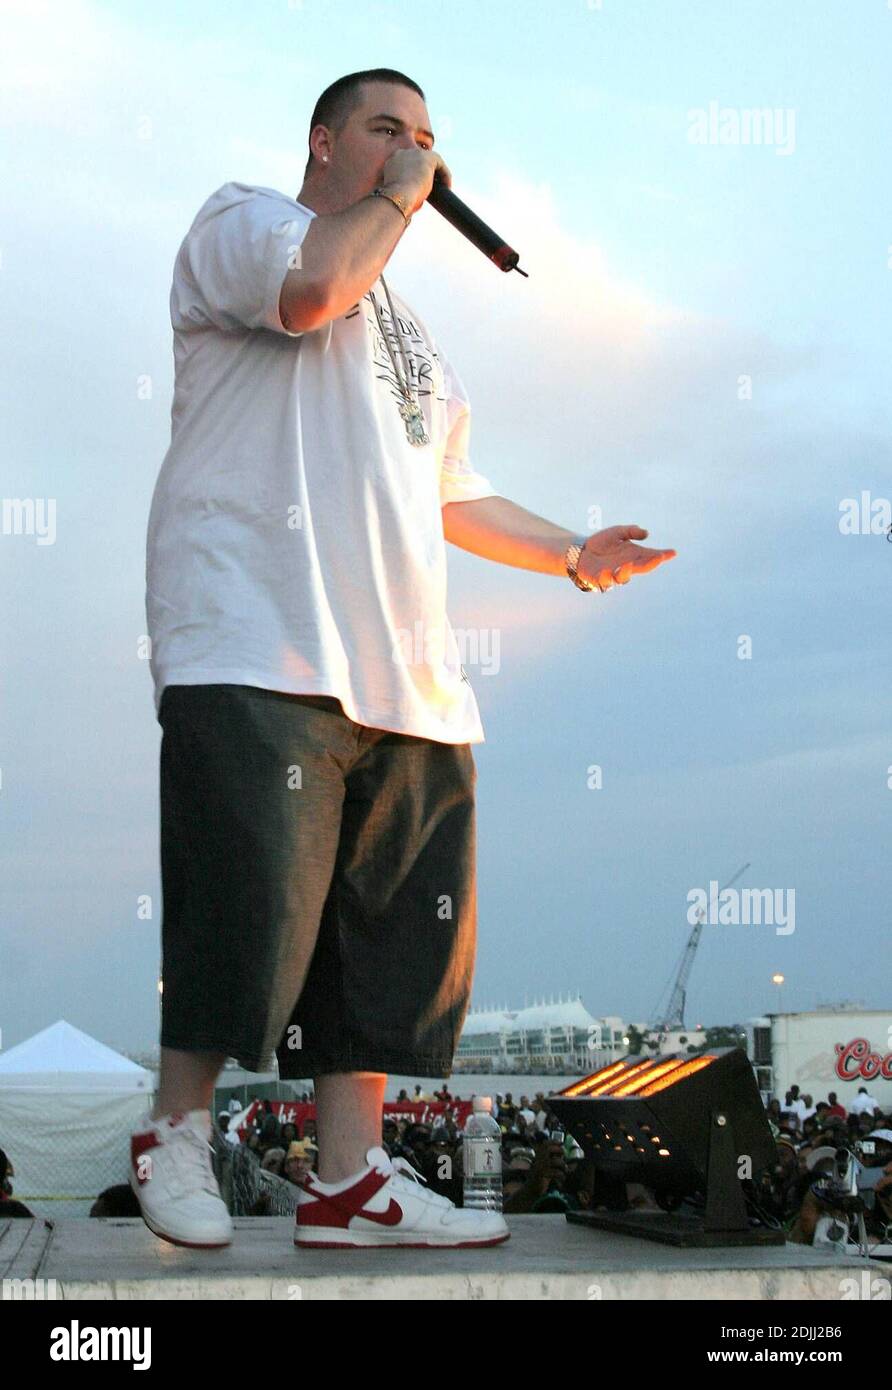 Brooke Hogan at Fest 06. Joining her on stage, rapper and grill designer Paul Wall, who co-starred in Brooke's new video "About Us," shot in anticipation of her album debut